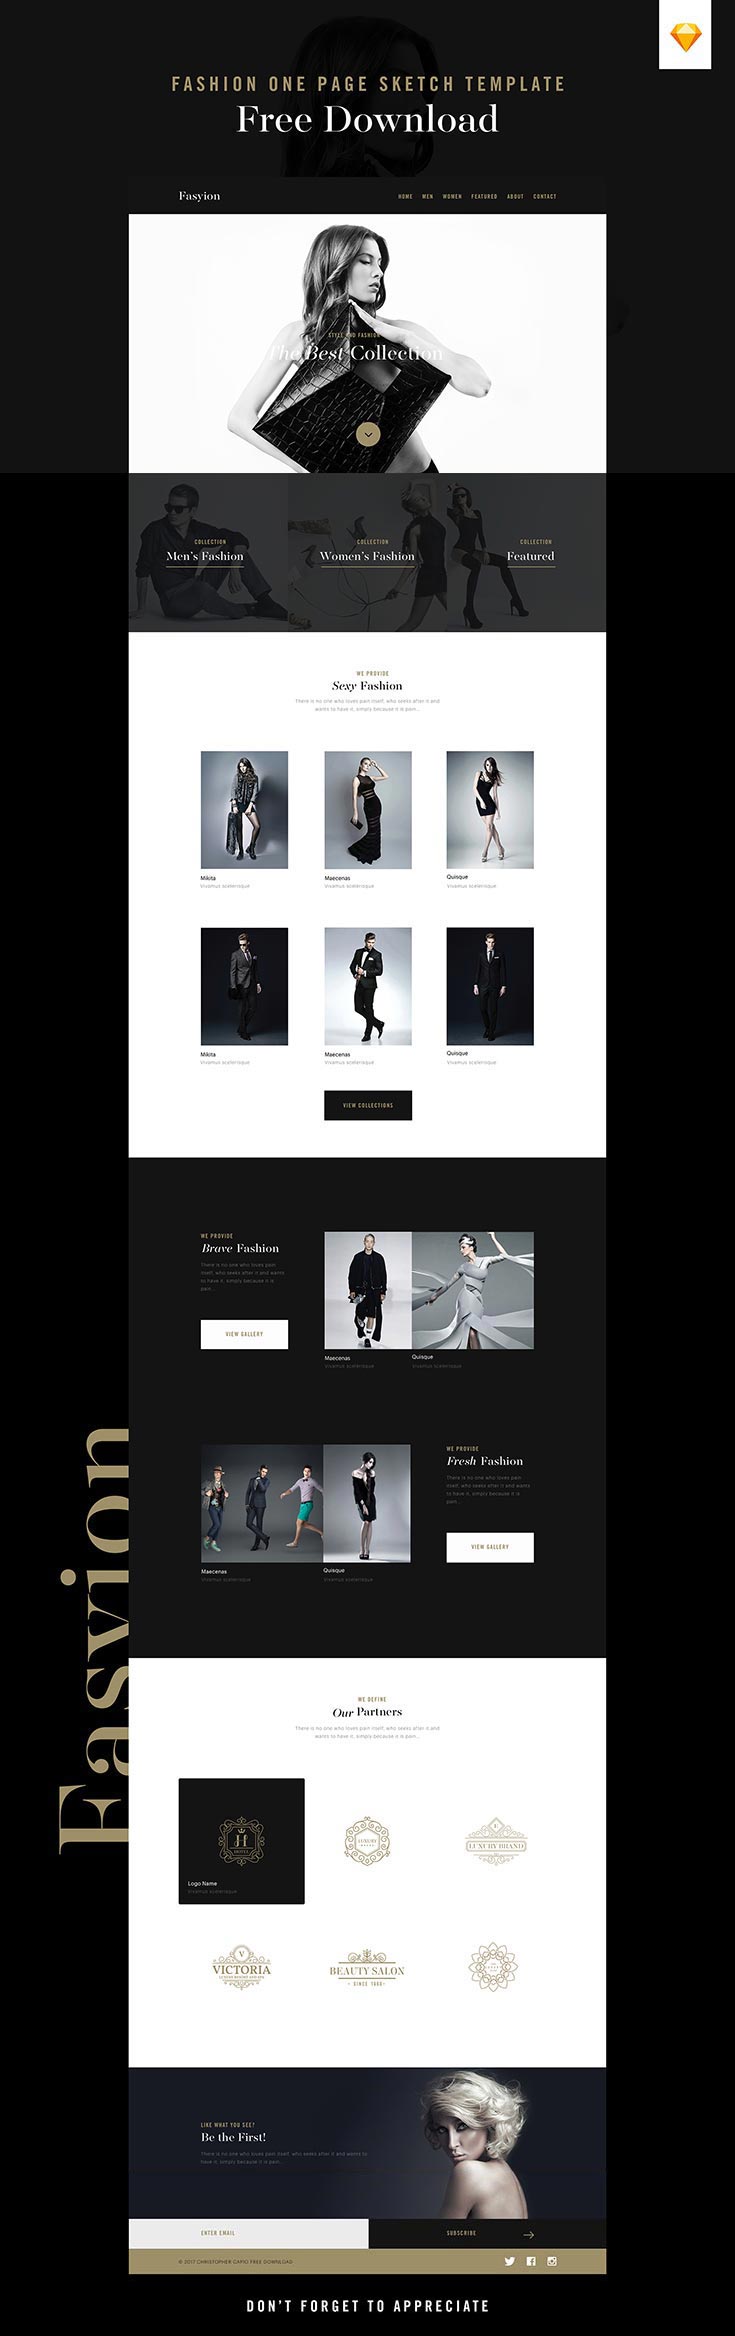 Free Fashion One Page Sketch Template